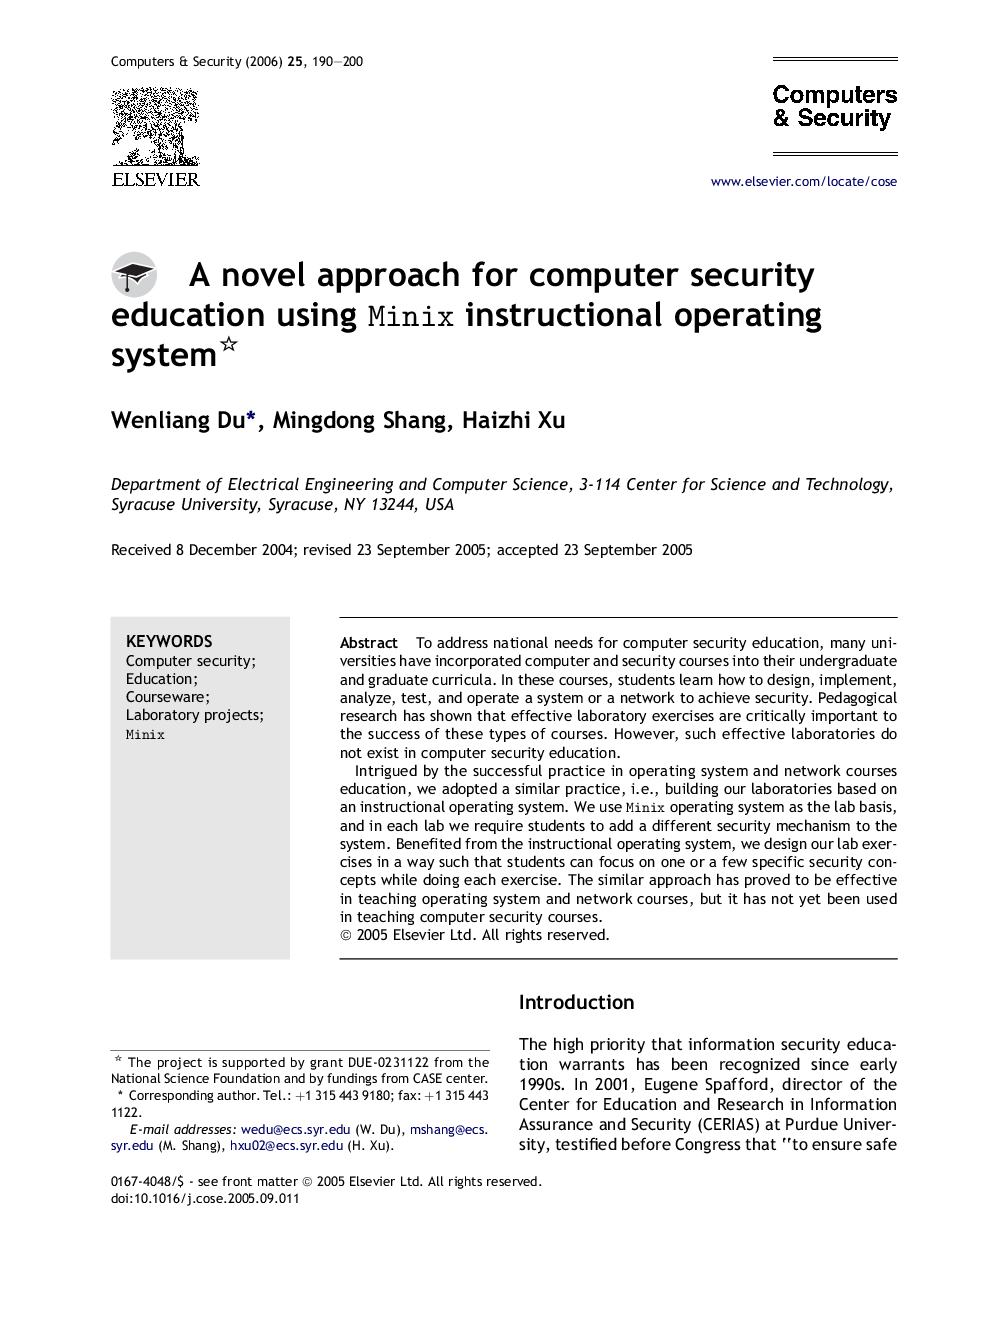 A novel approach for computer security education using Minix instructional operating system 